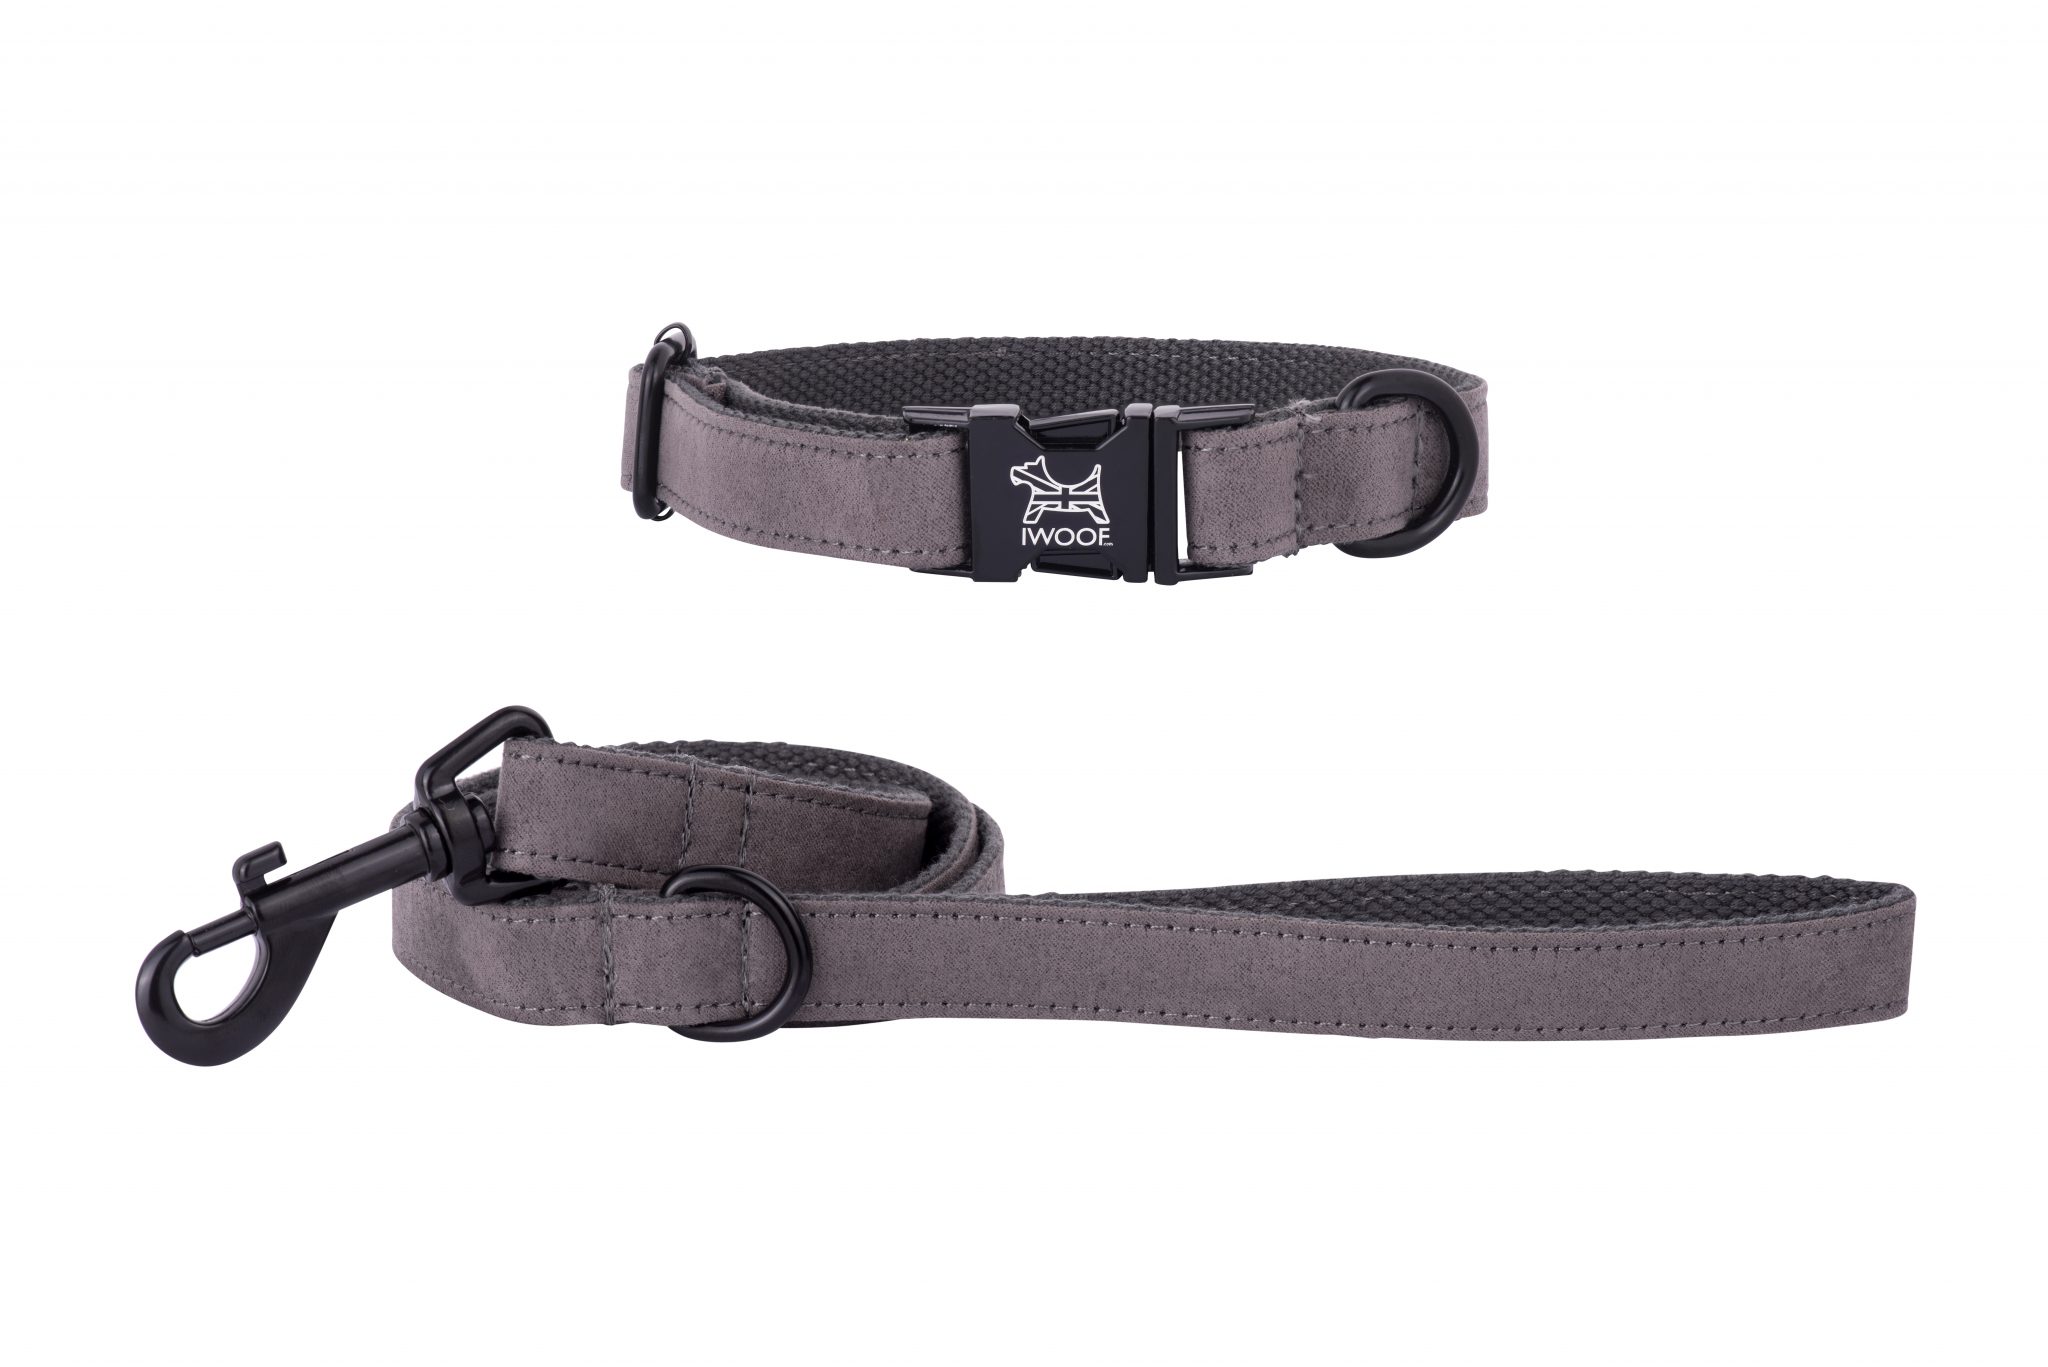 British Grey designer dog collar and lead hand made by IWOOF